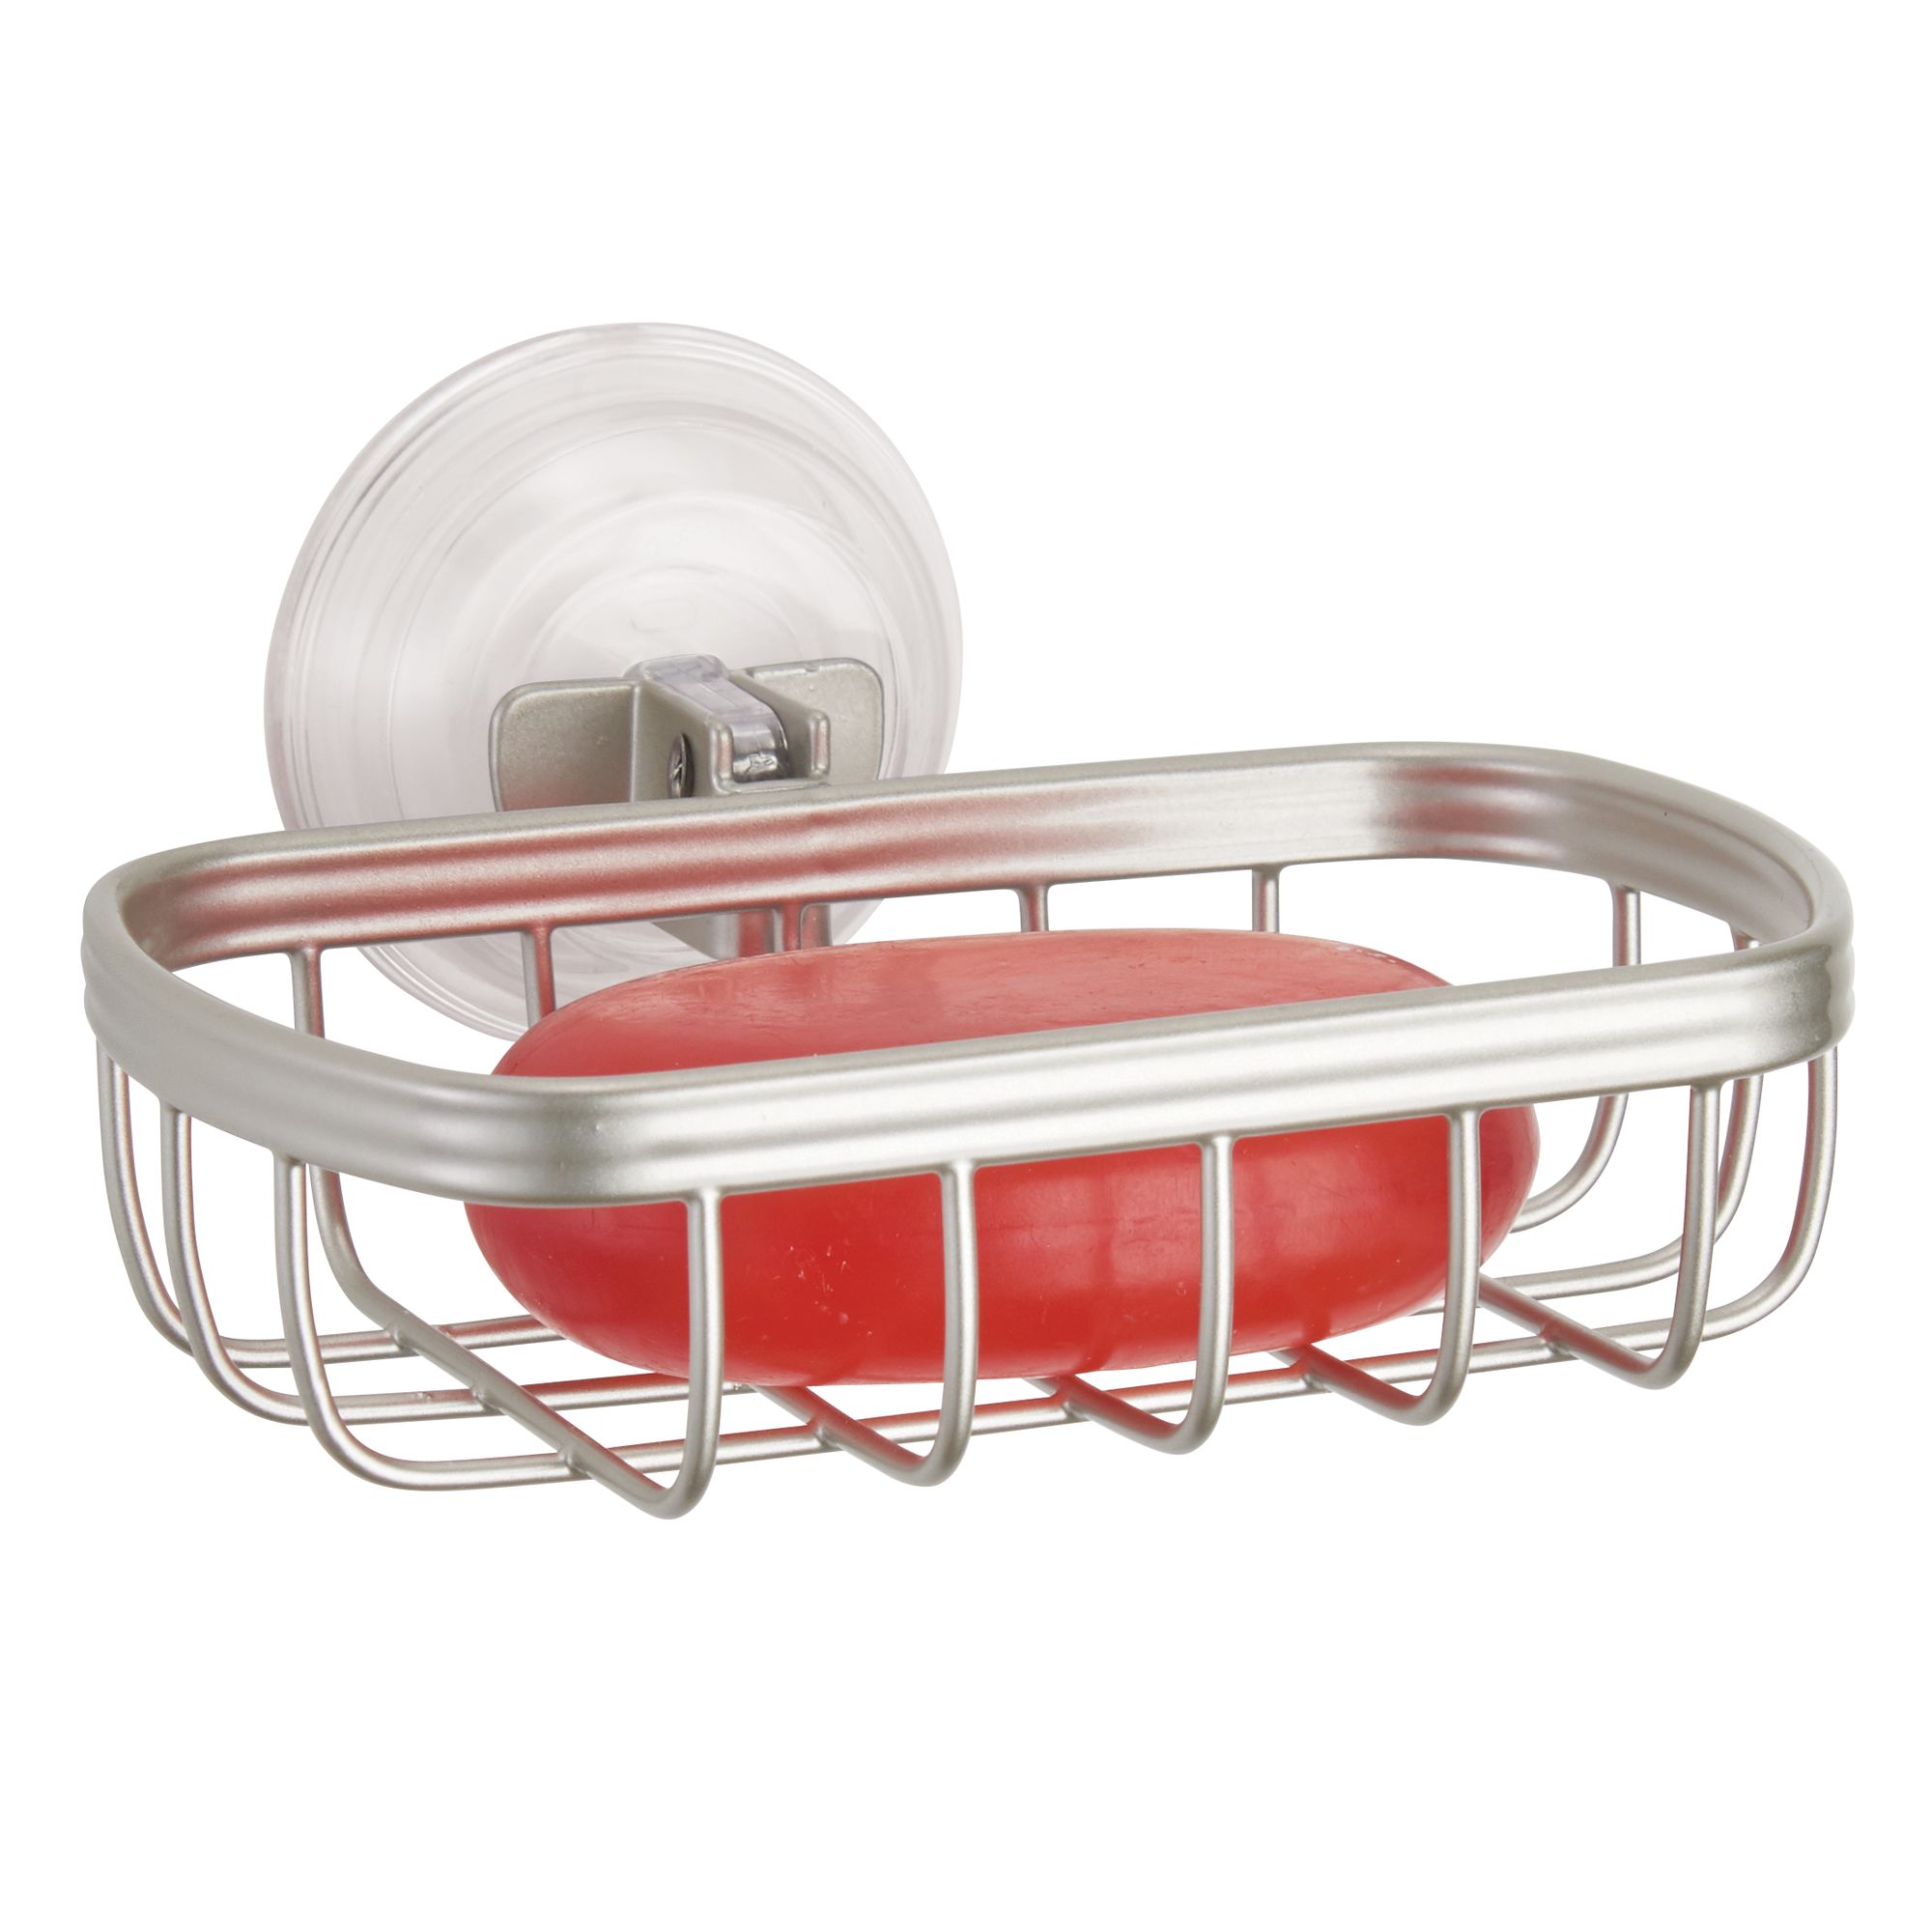 Better Homes & Gardens Silver Steel Suction Cup Soap Holder - image 1 of 4